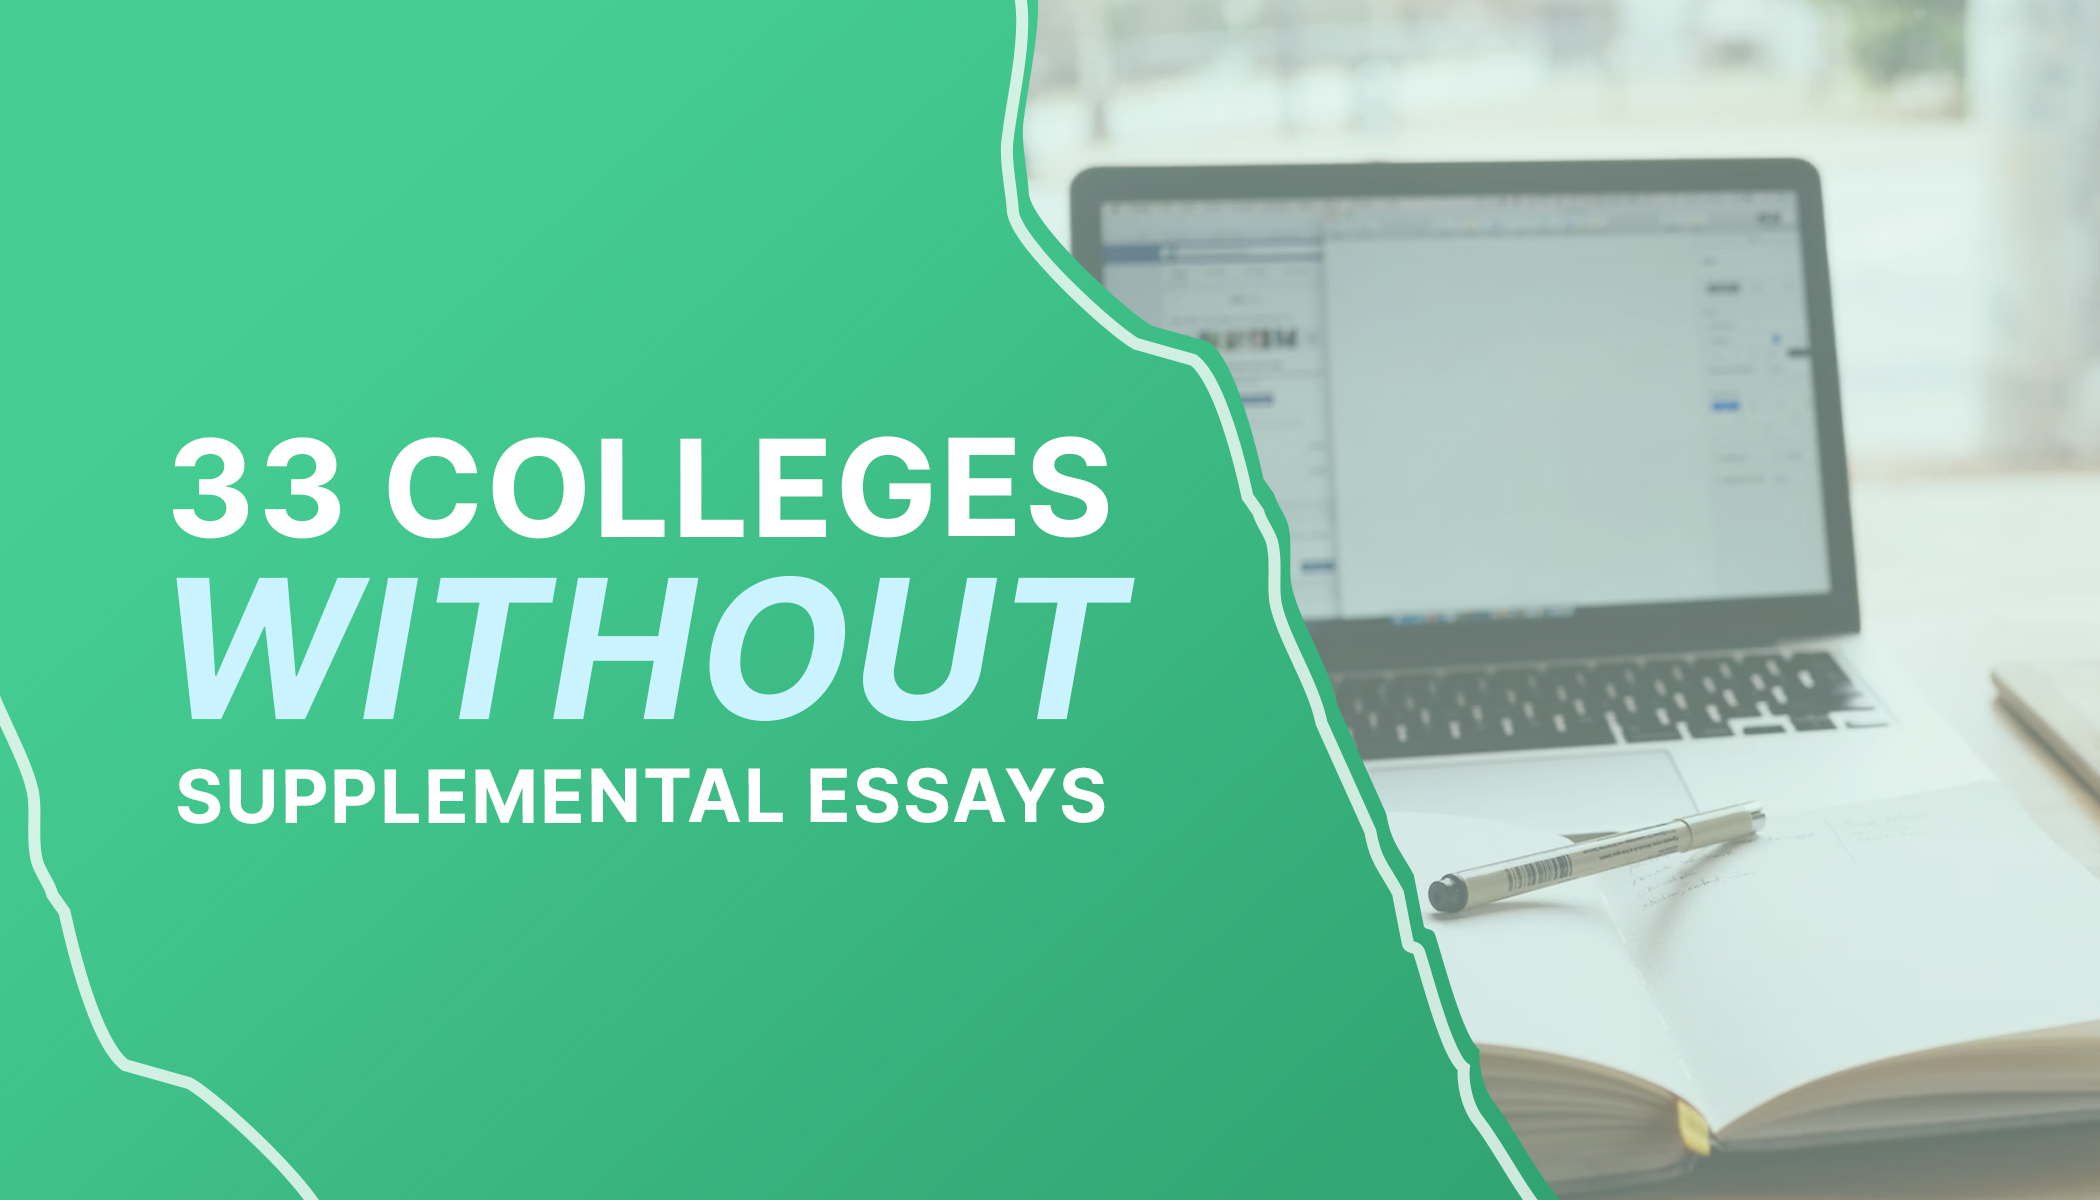 colleges without supplemental essays in california